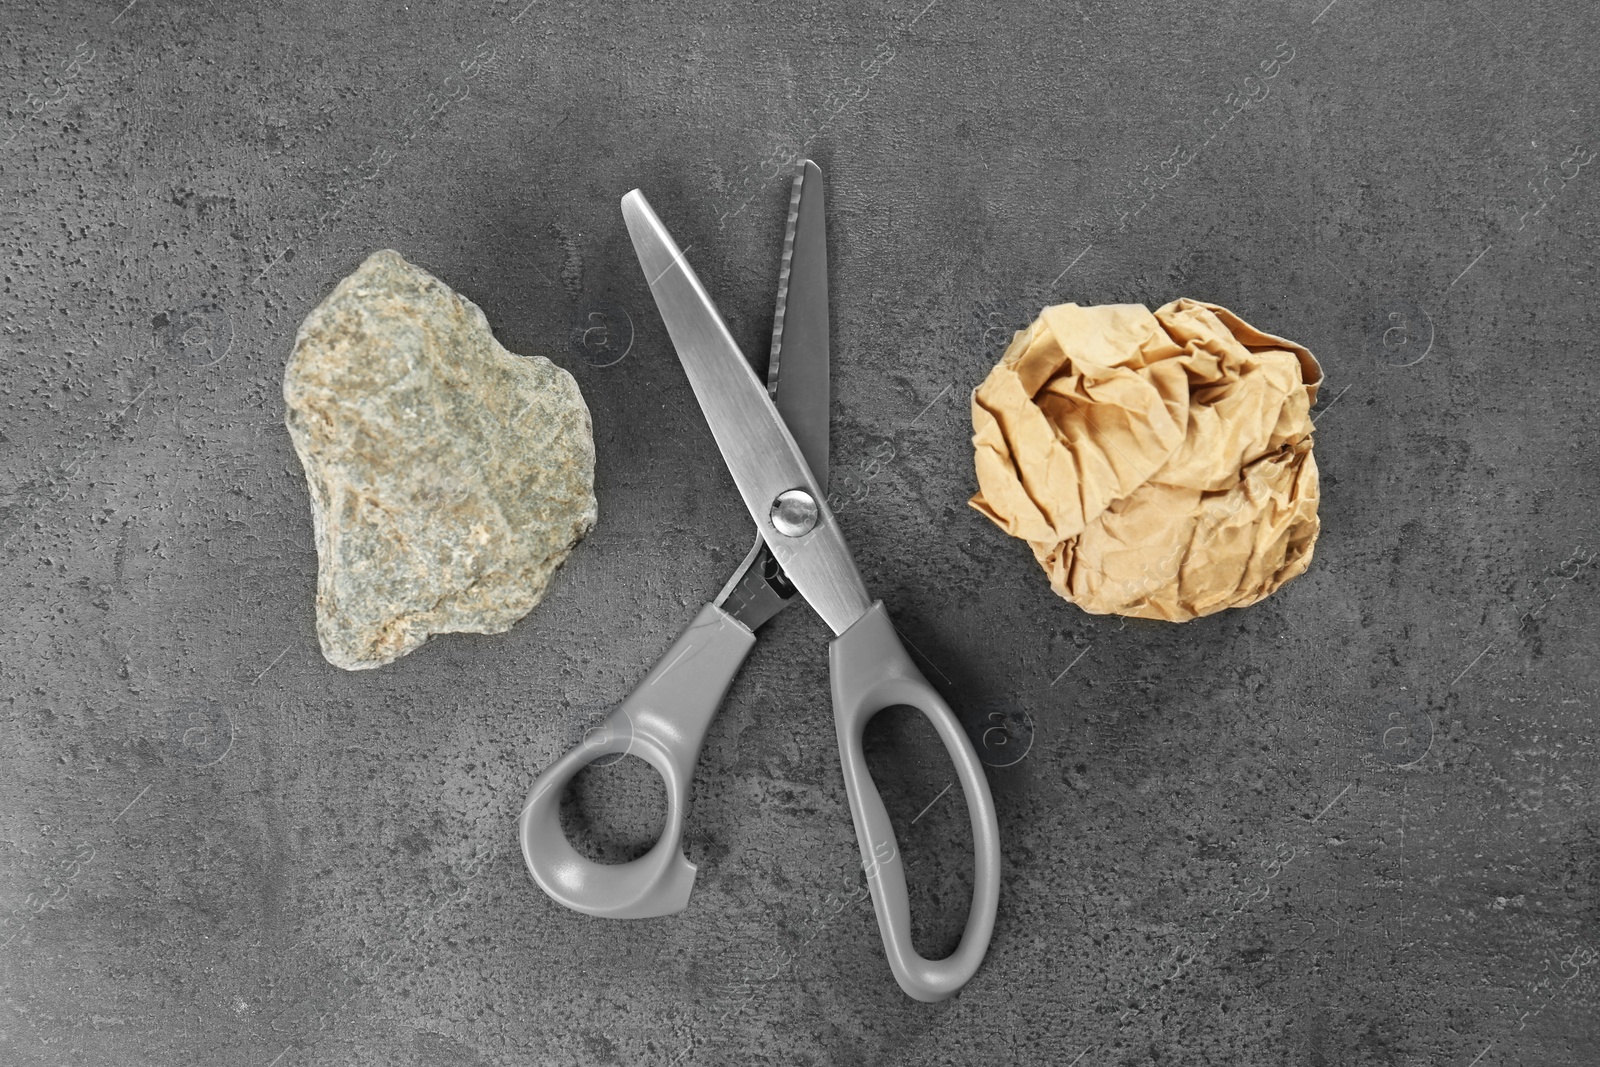 Photo of Flat lay composition with rock, paper and scissors on grey stone background